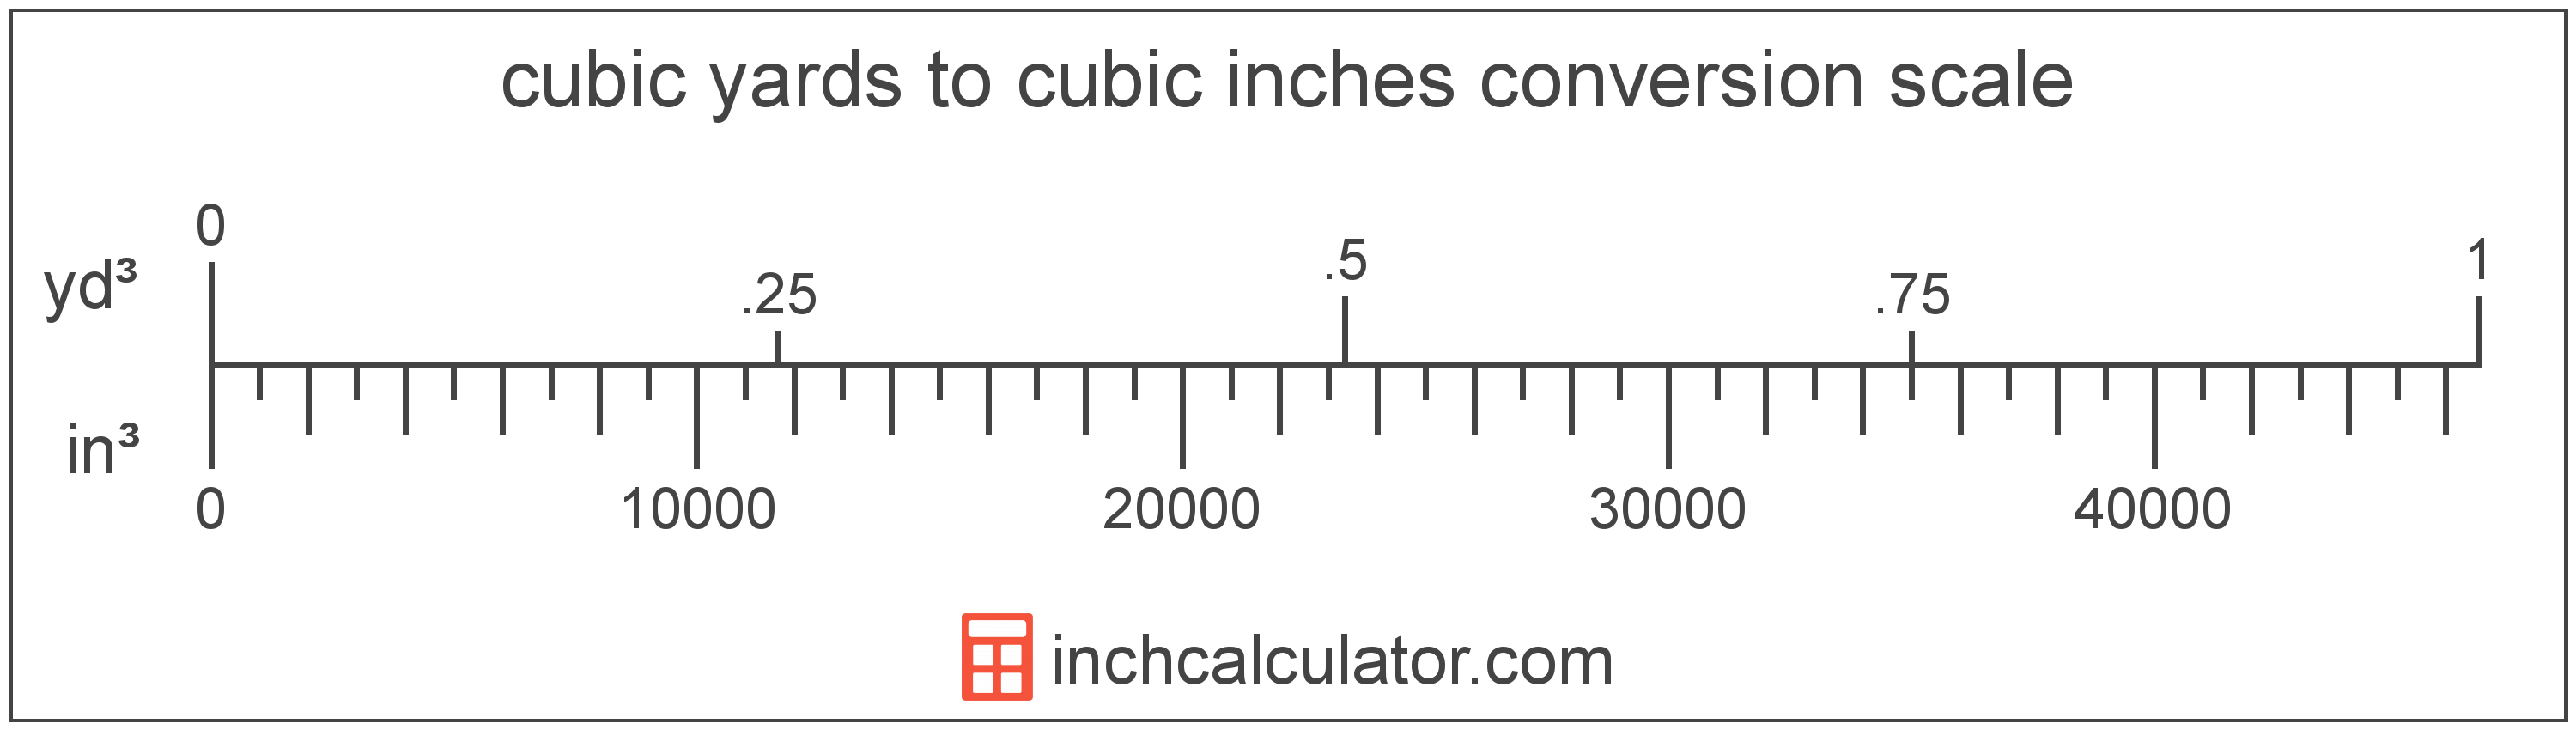 Cubic Yards to Cubic Inches Conversion (yd³ to in³)